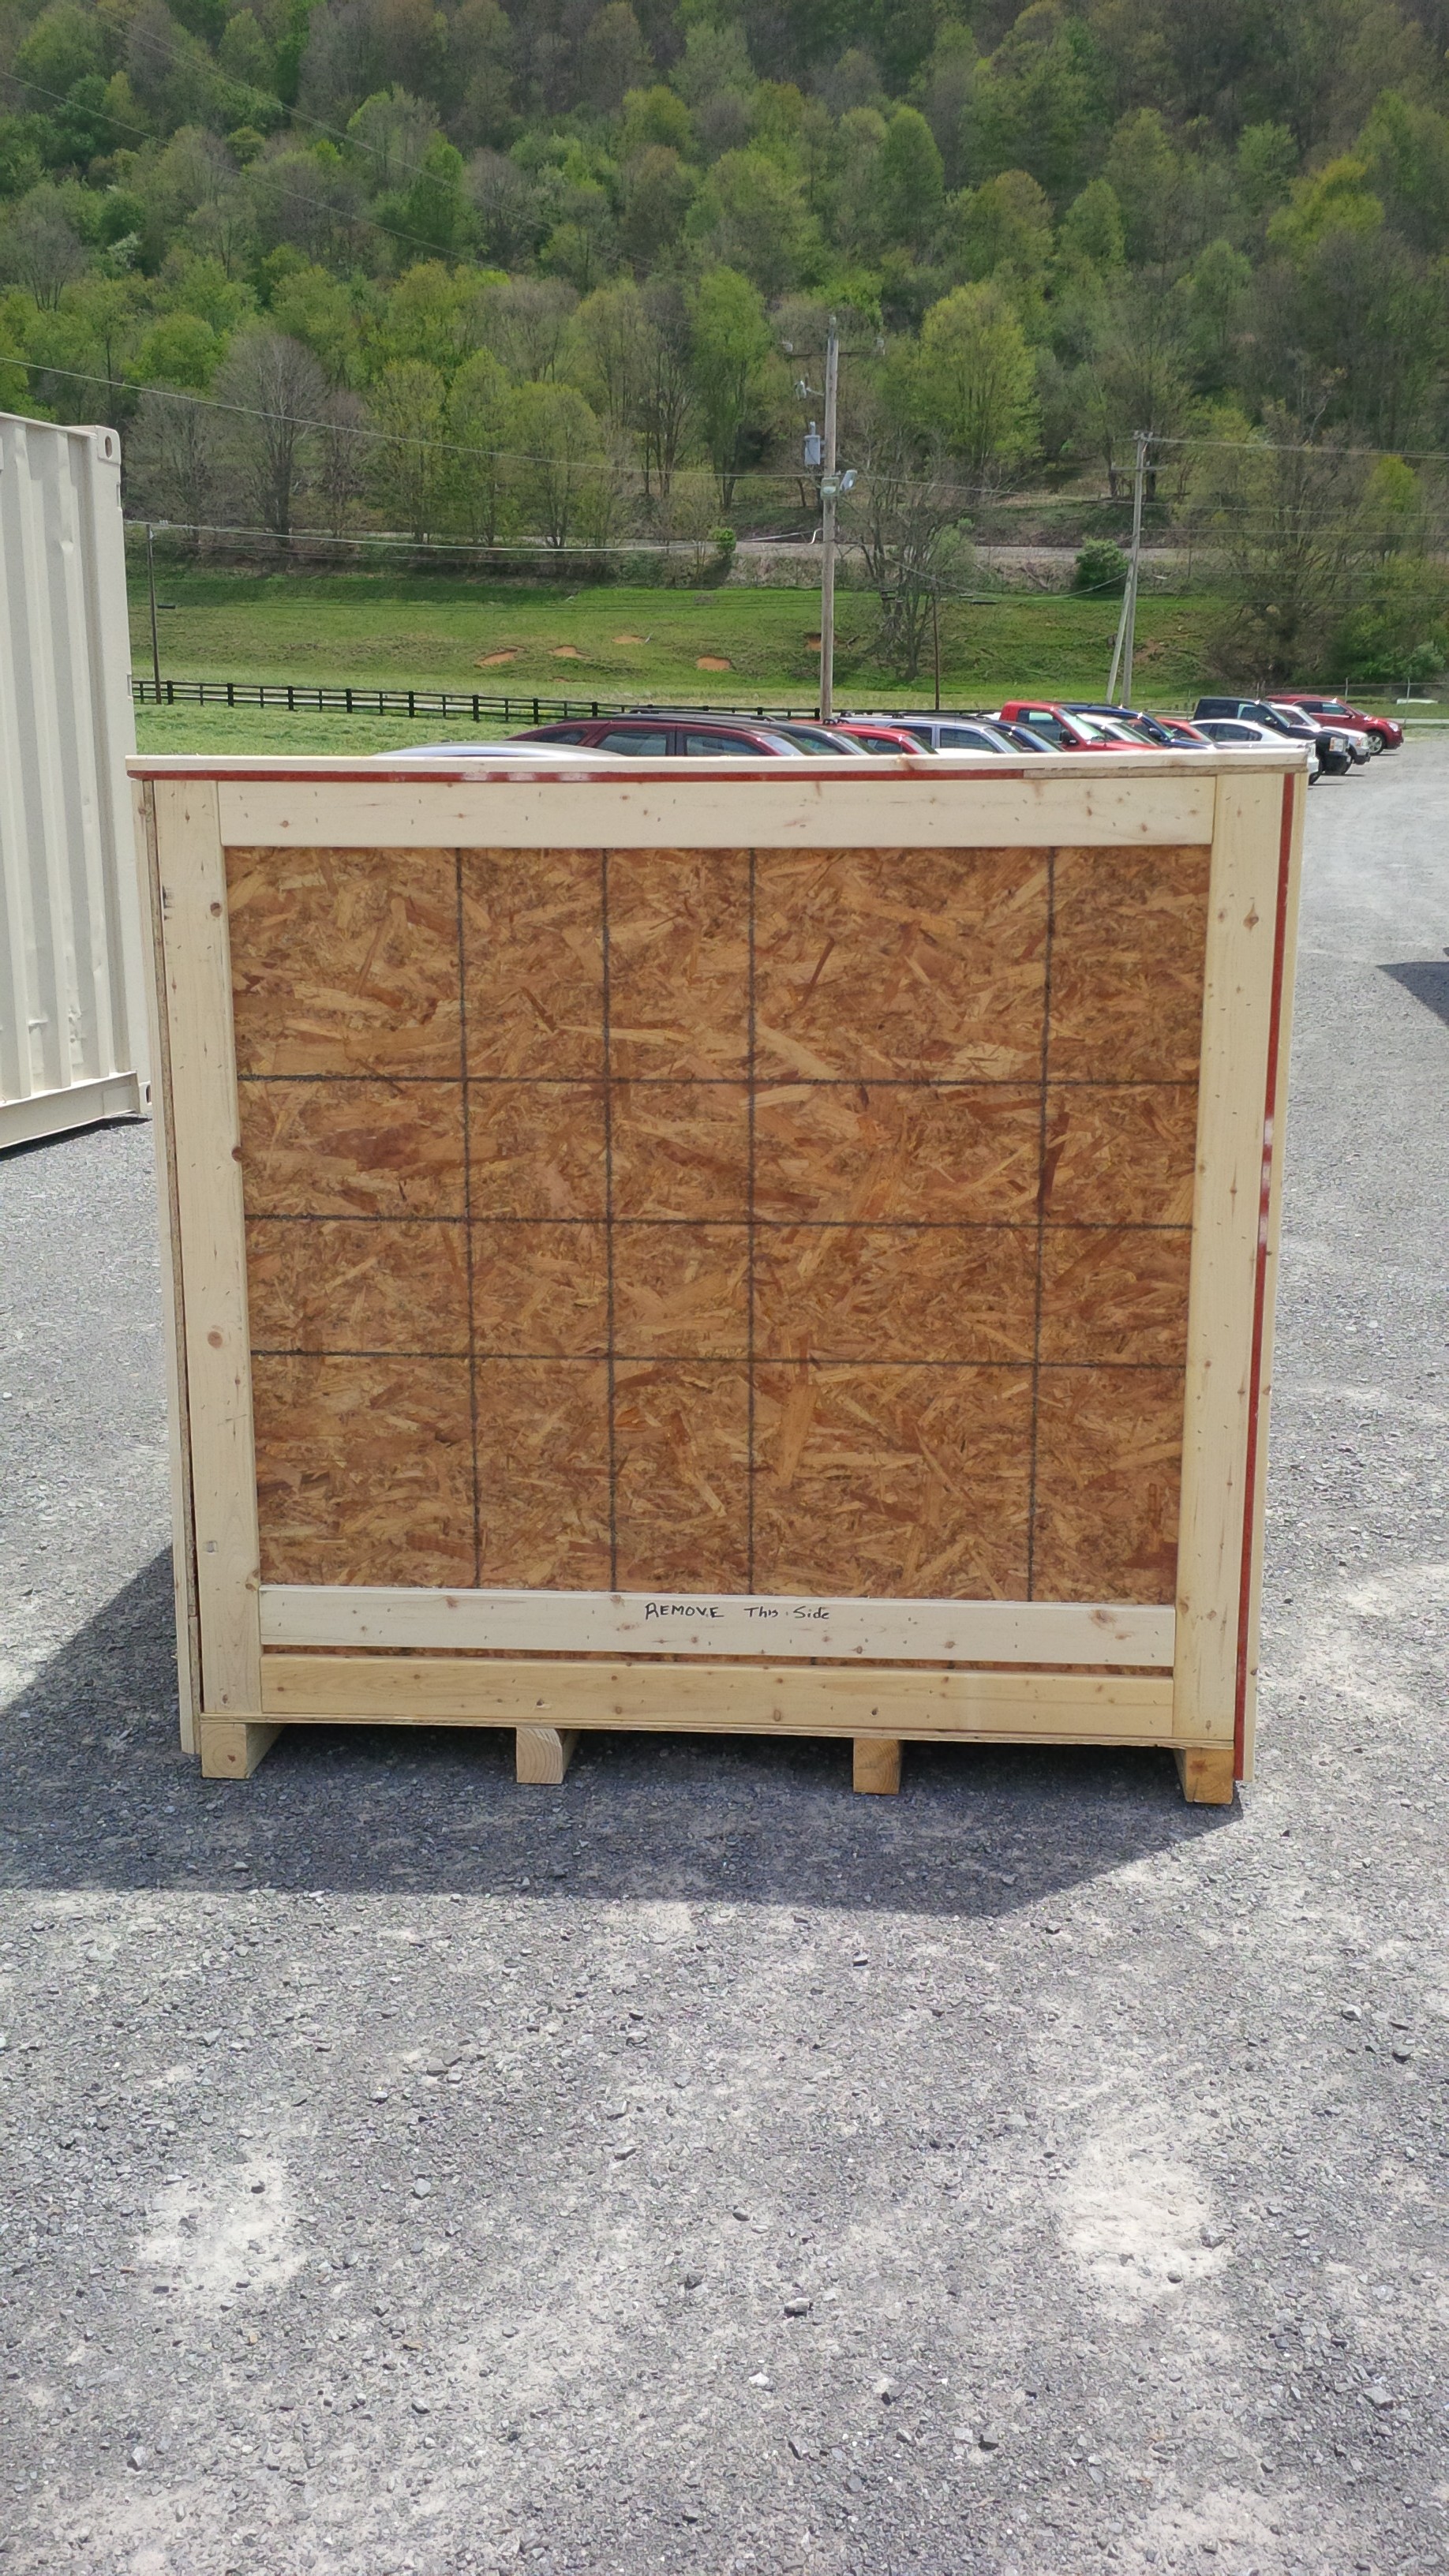 Packing Service, Inc. On-Site Custom Wooden Crates (1)